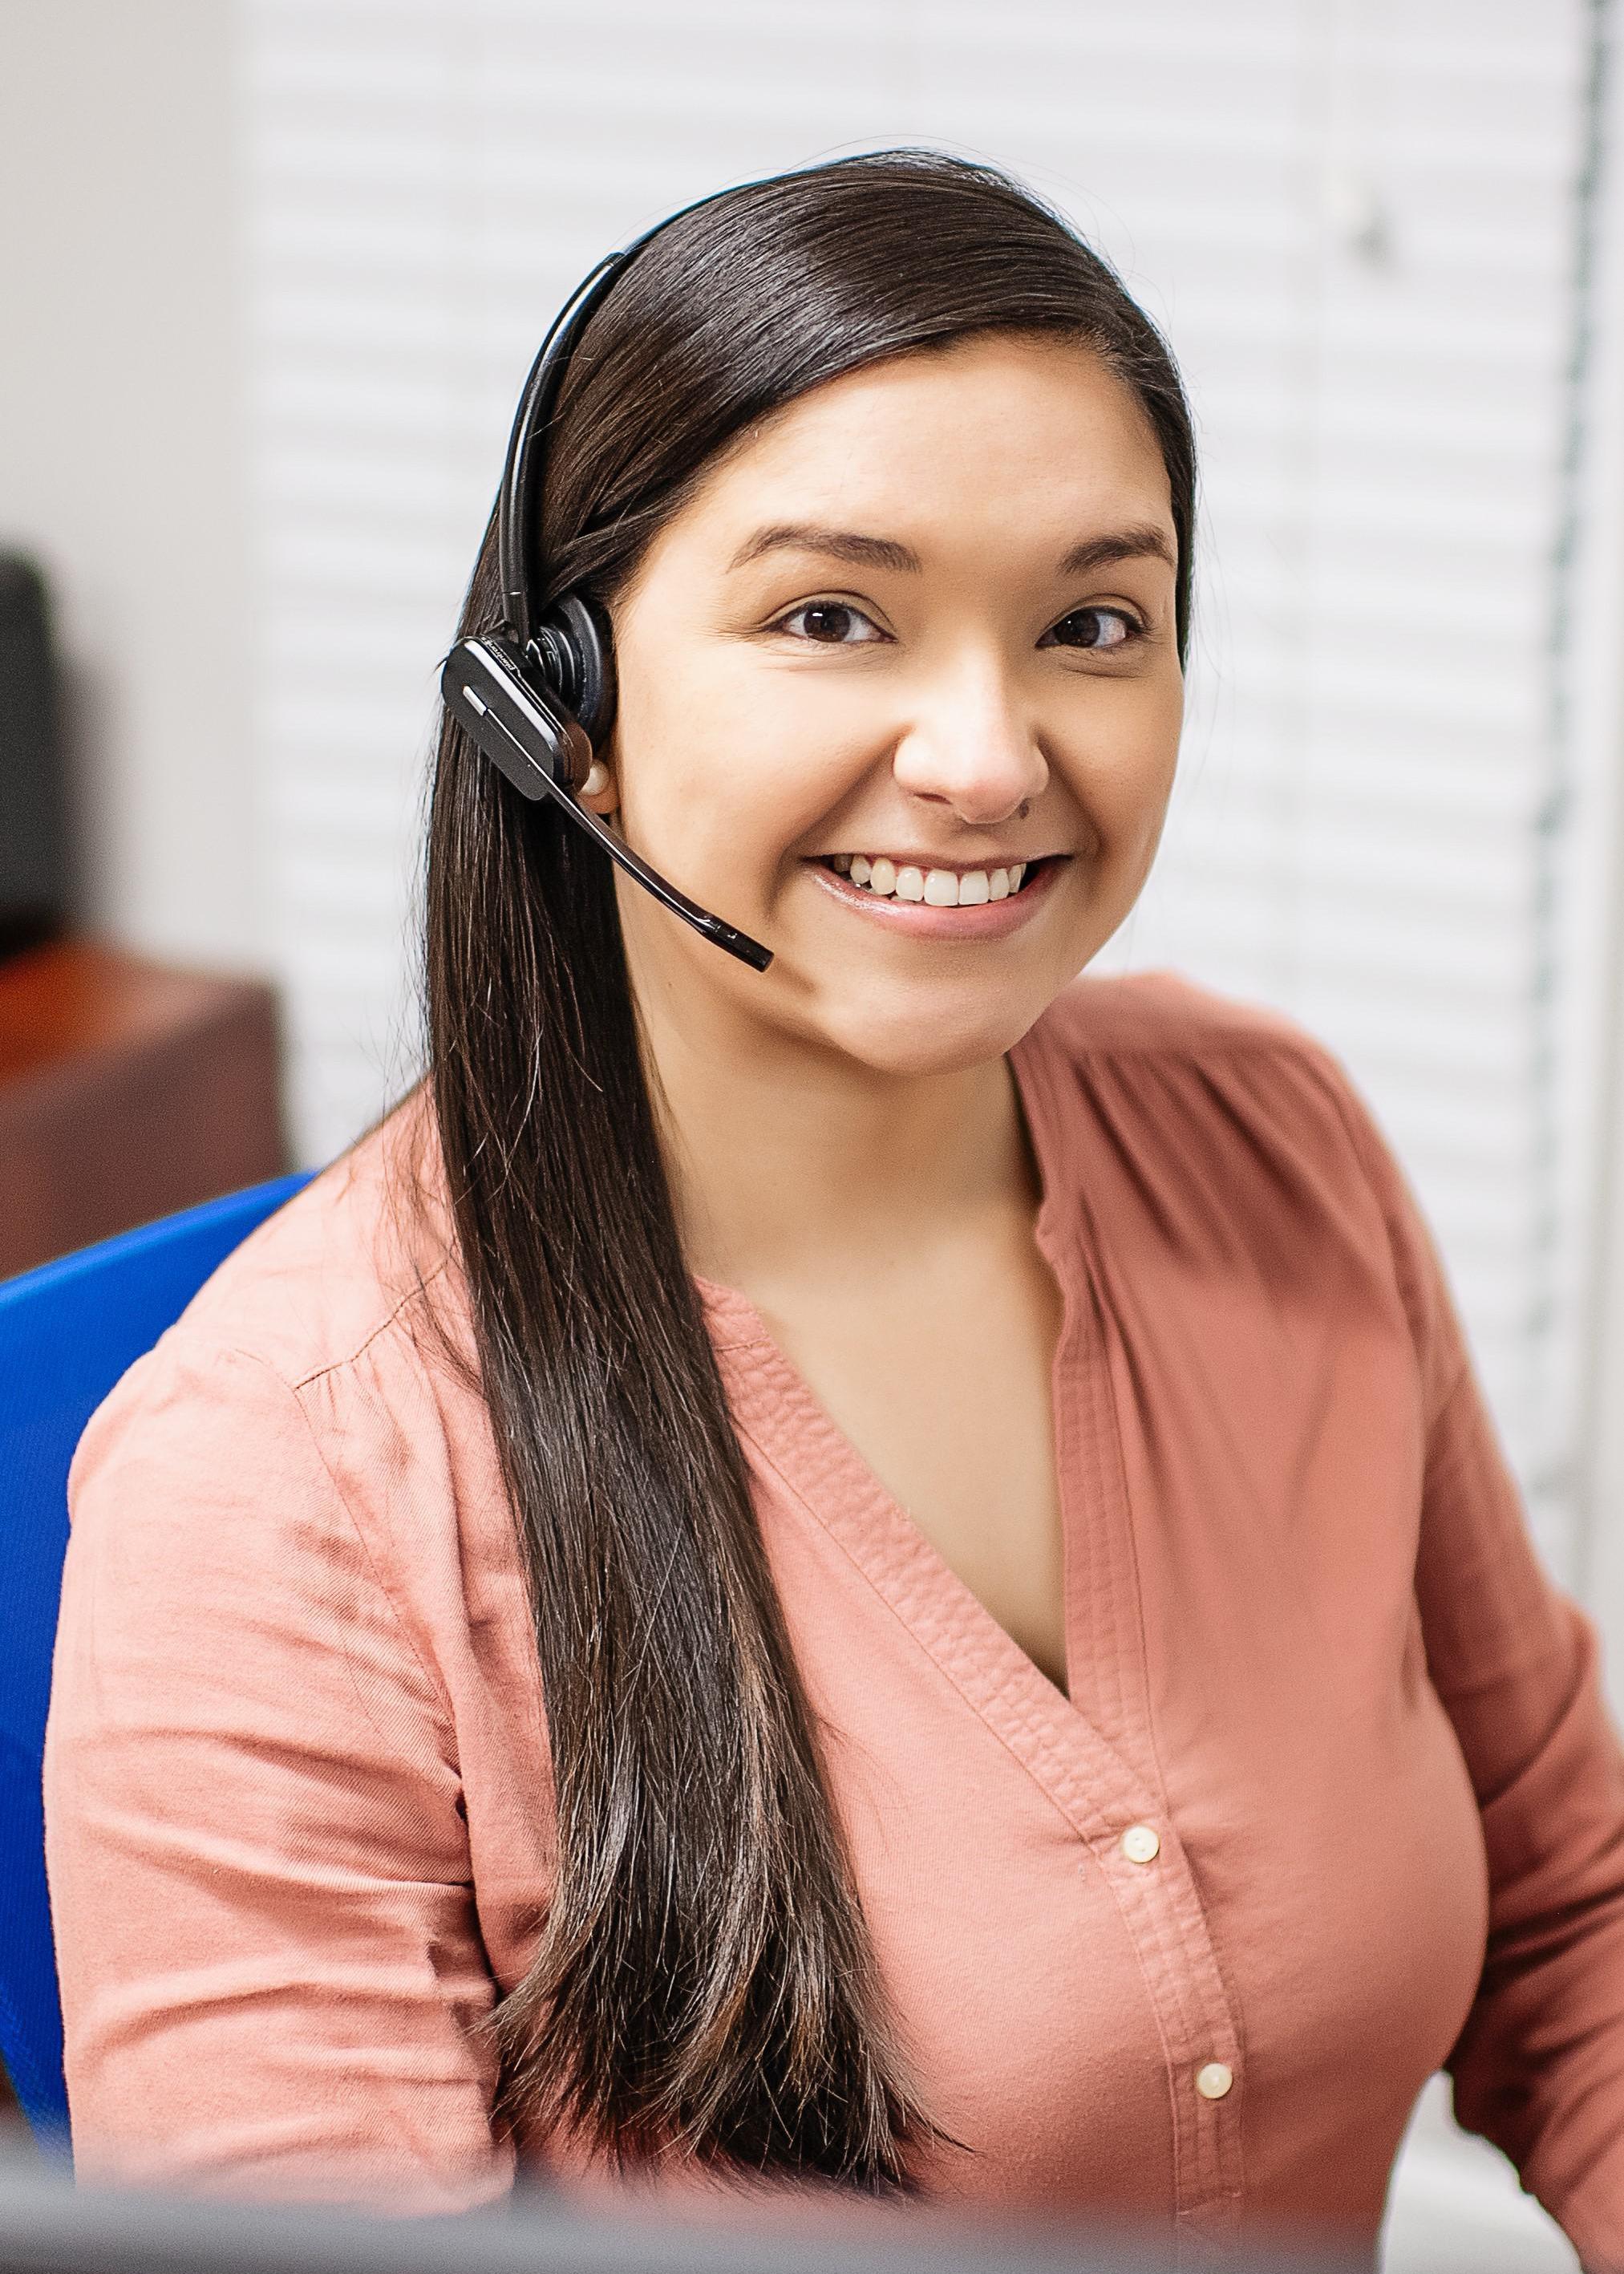 Call and speak with one of our friendly team members